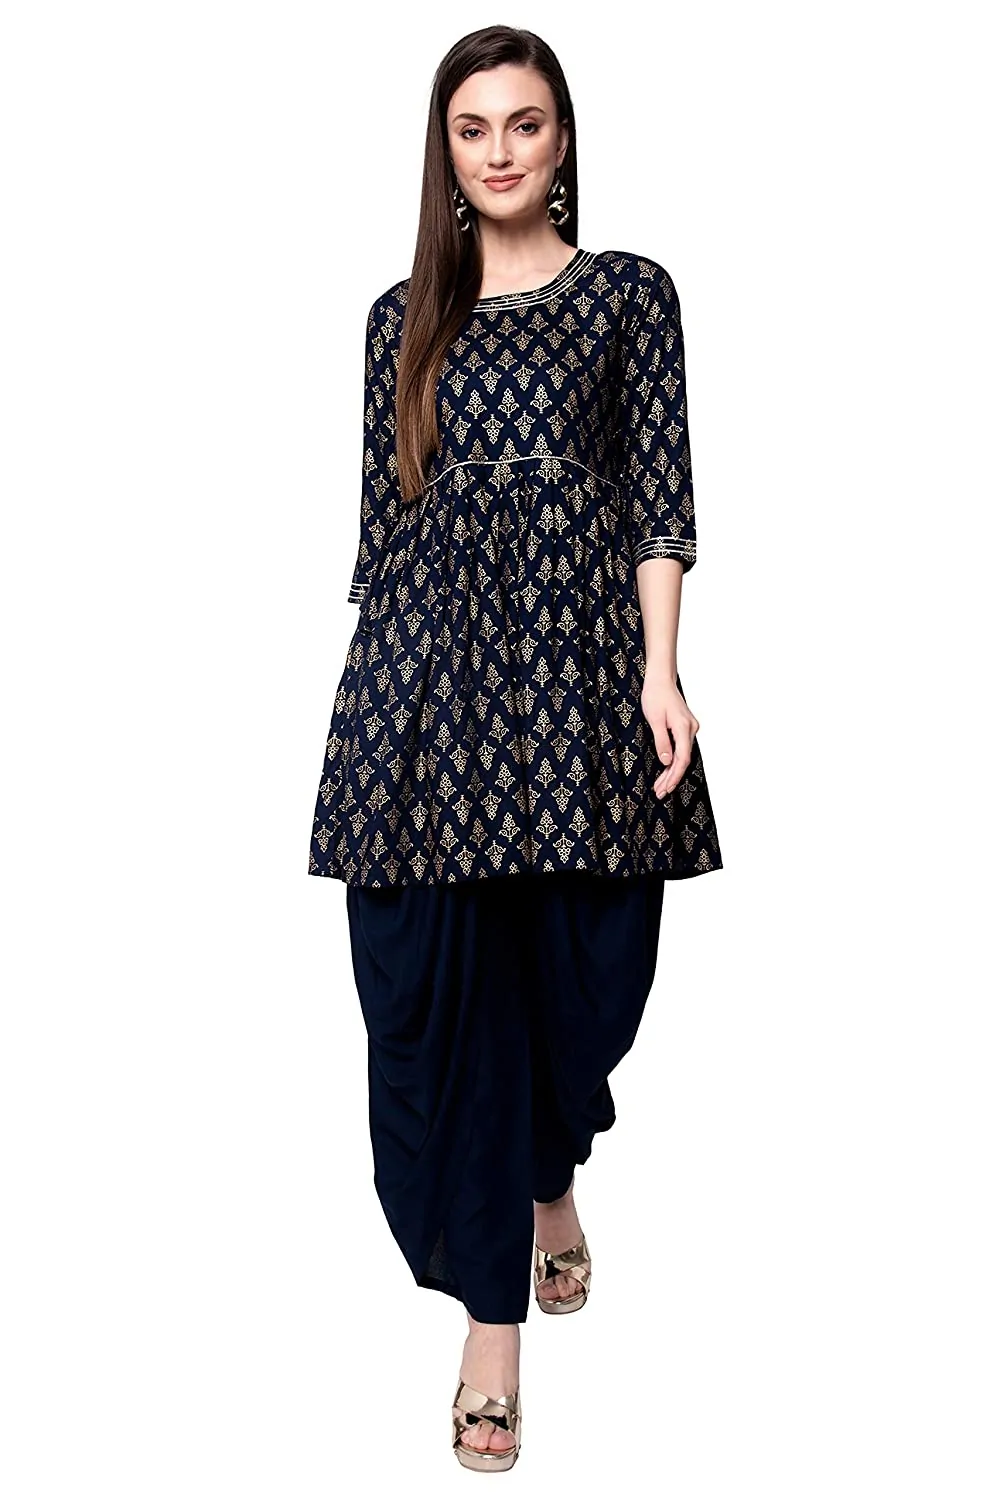 Buy Women Cloths Online, Affordable Kurti & Dress Material for Women Online  - page 37